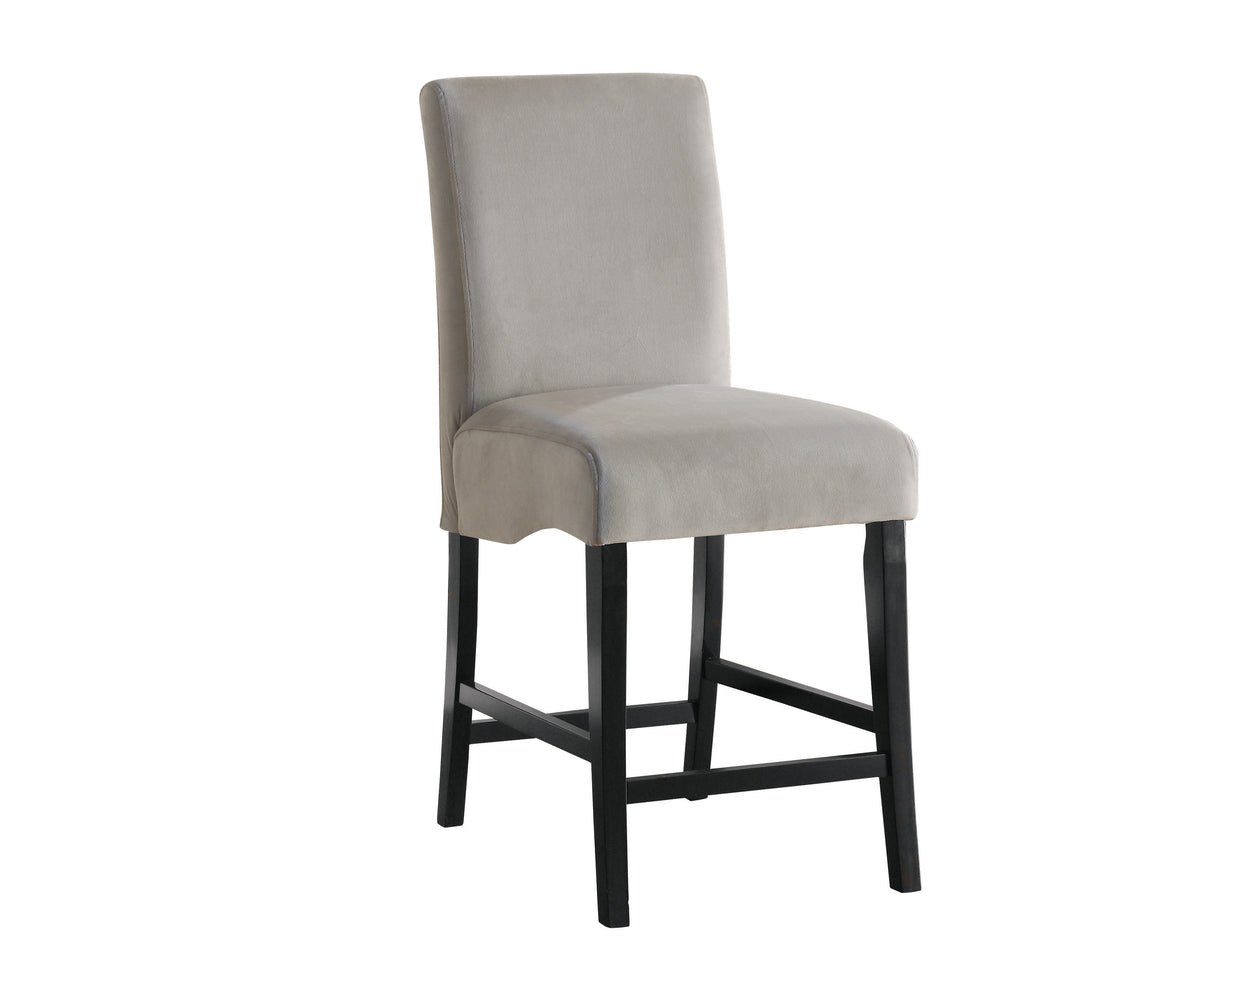 Stanton_Contemporary_Dining_Chair_Set_of_2_2